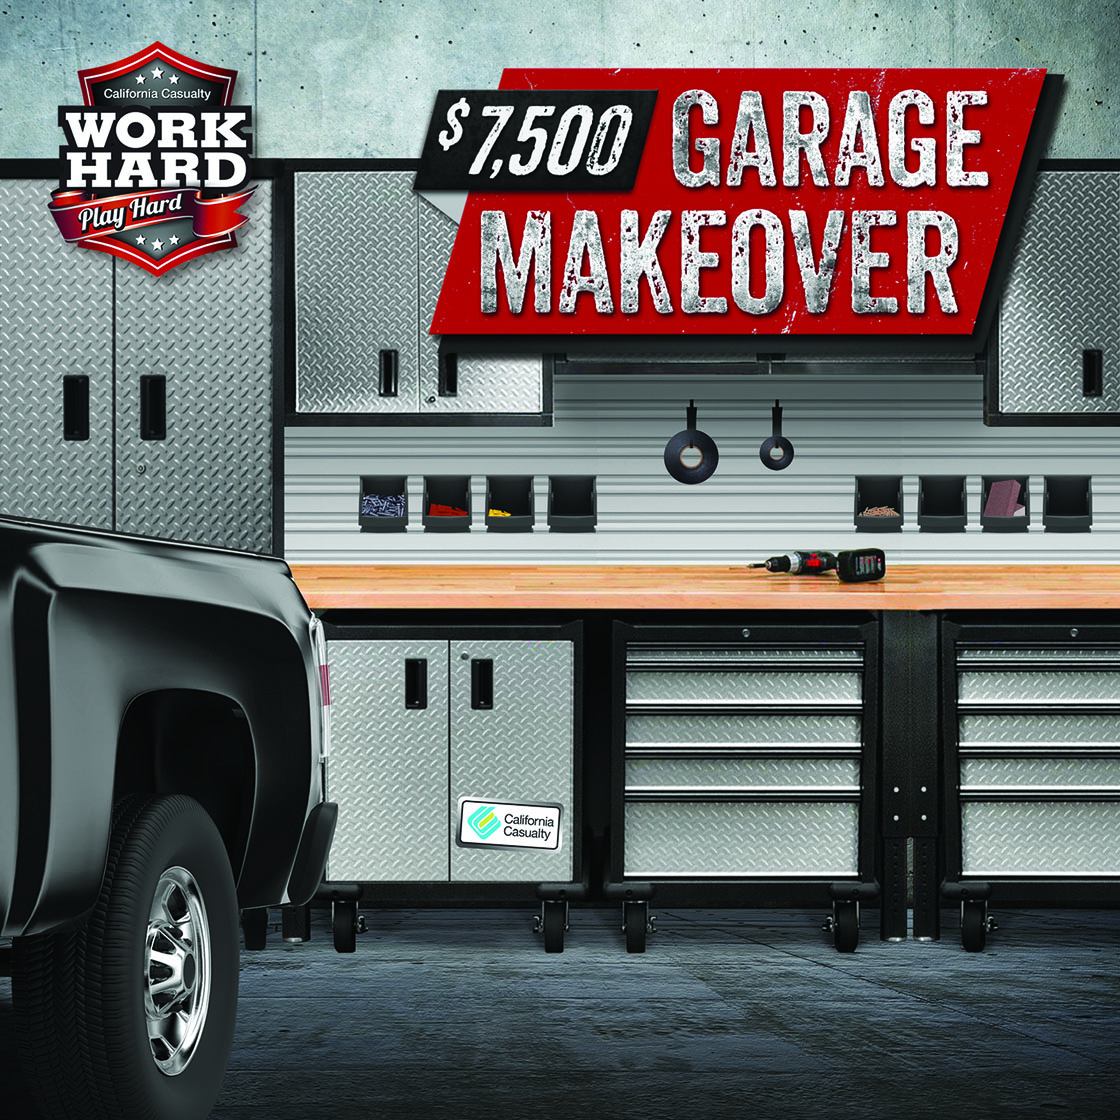 California Casualty's $7,500 Garage Makeover